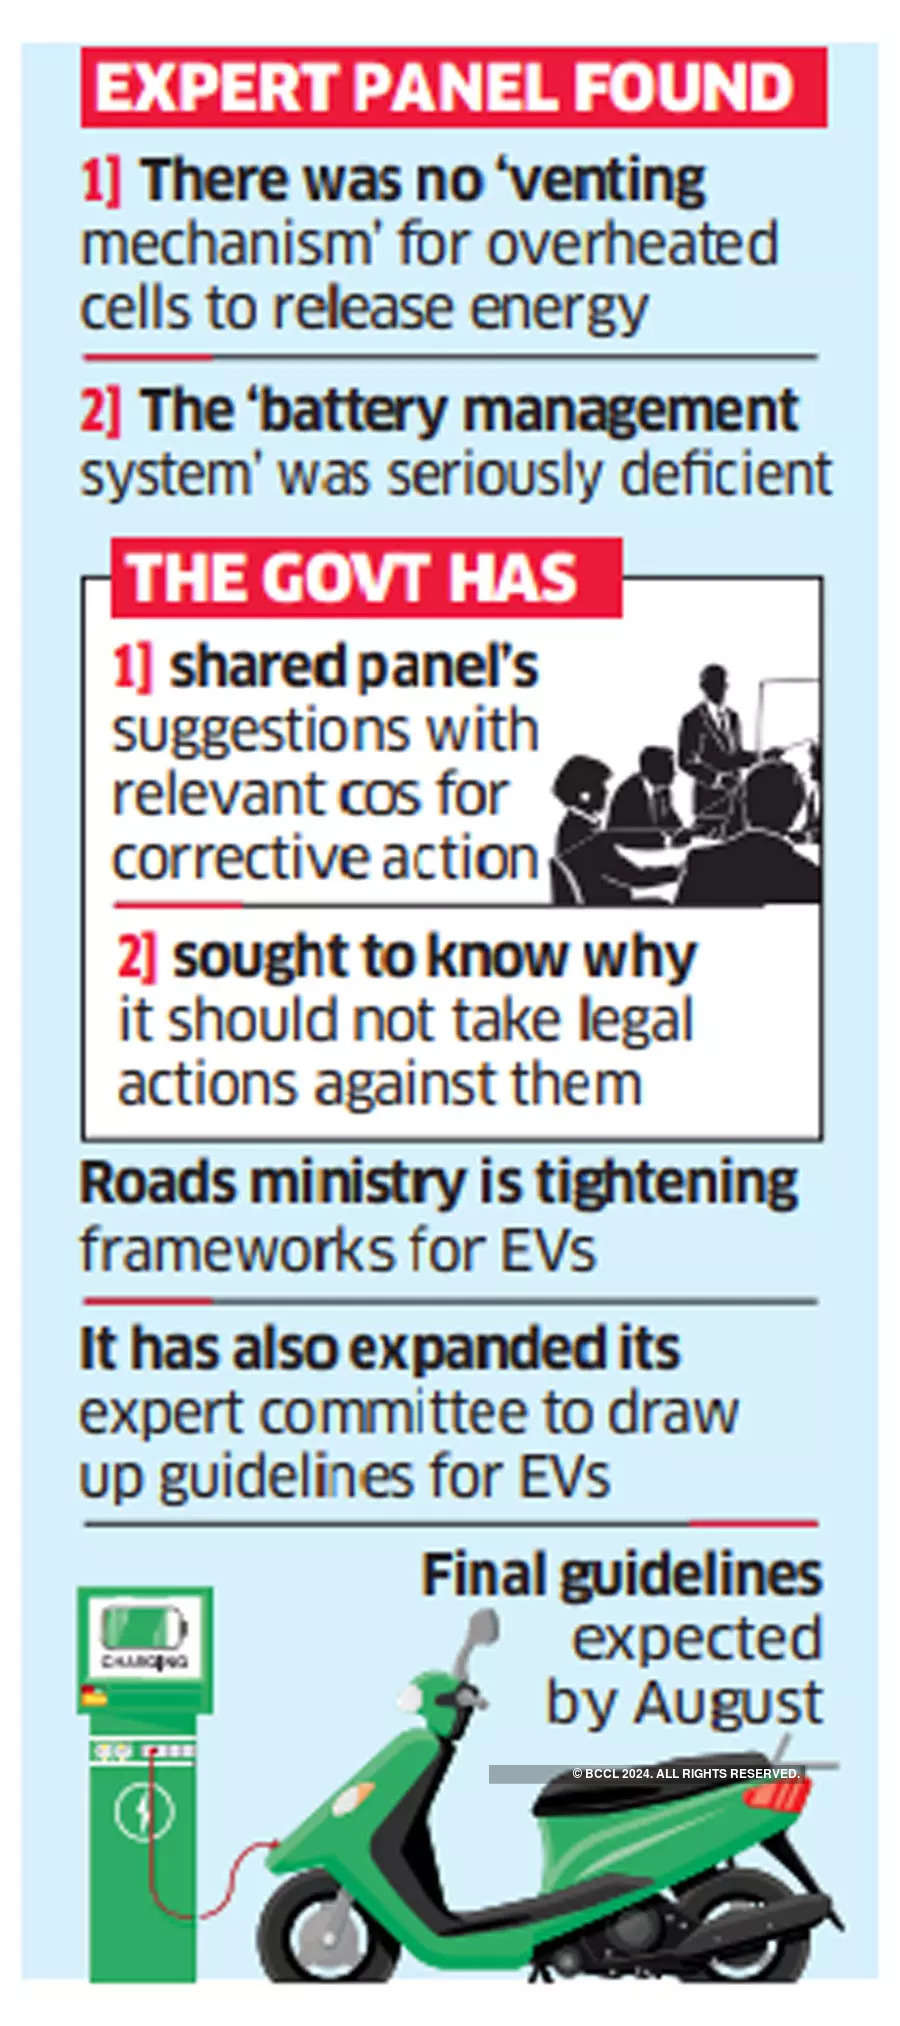 Lack of 'basic safety systems' behind EV fires, says probe panel